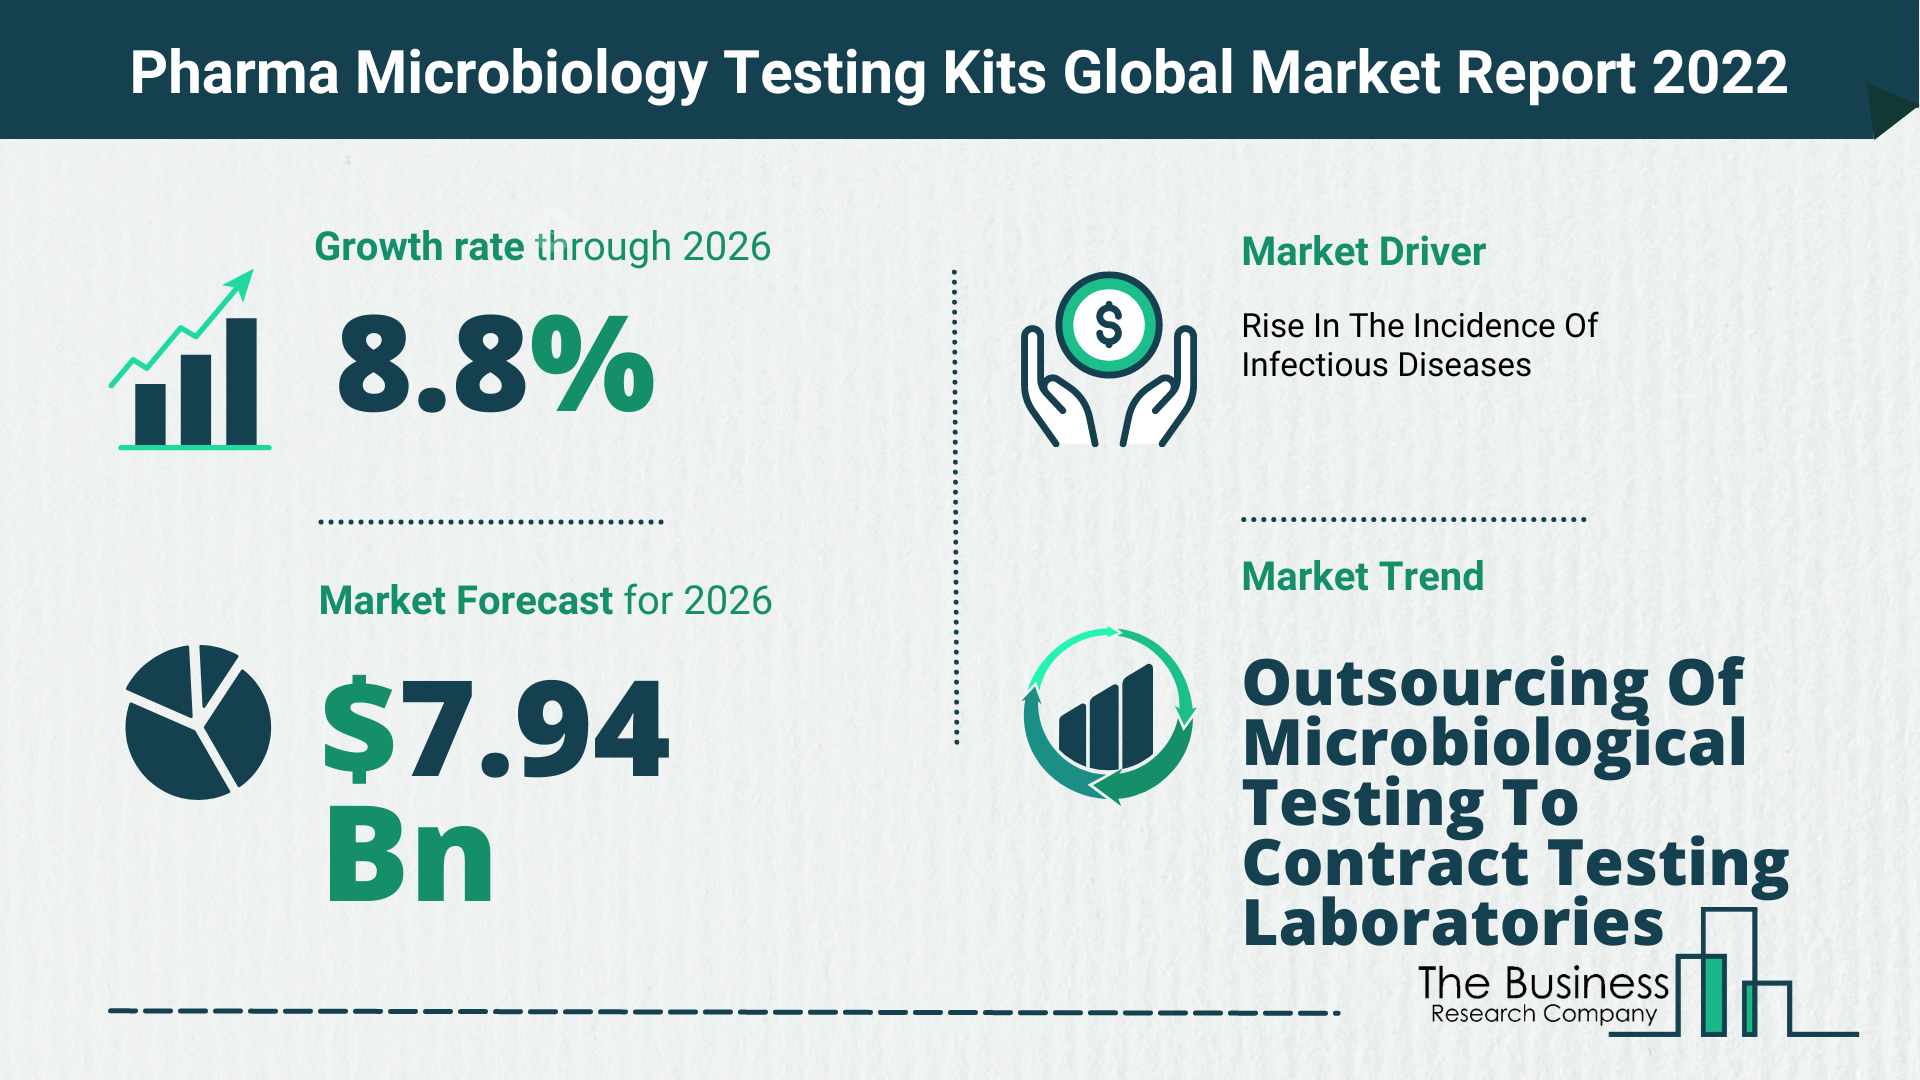 Global Pharma Microbiology Testing Kits Market 2022 – Market Opportunities And Strategies